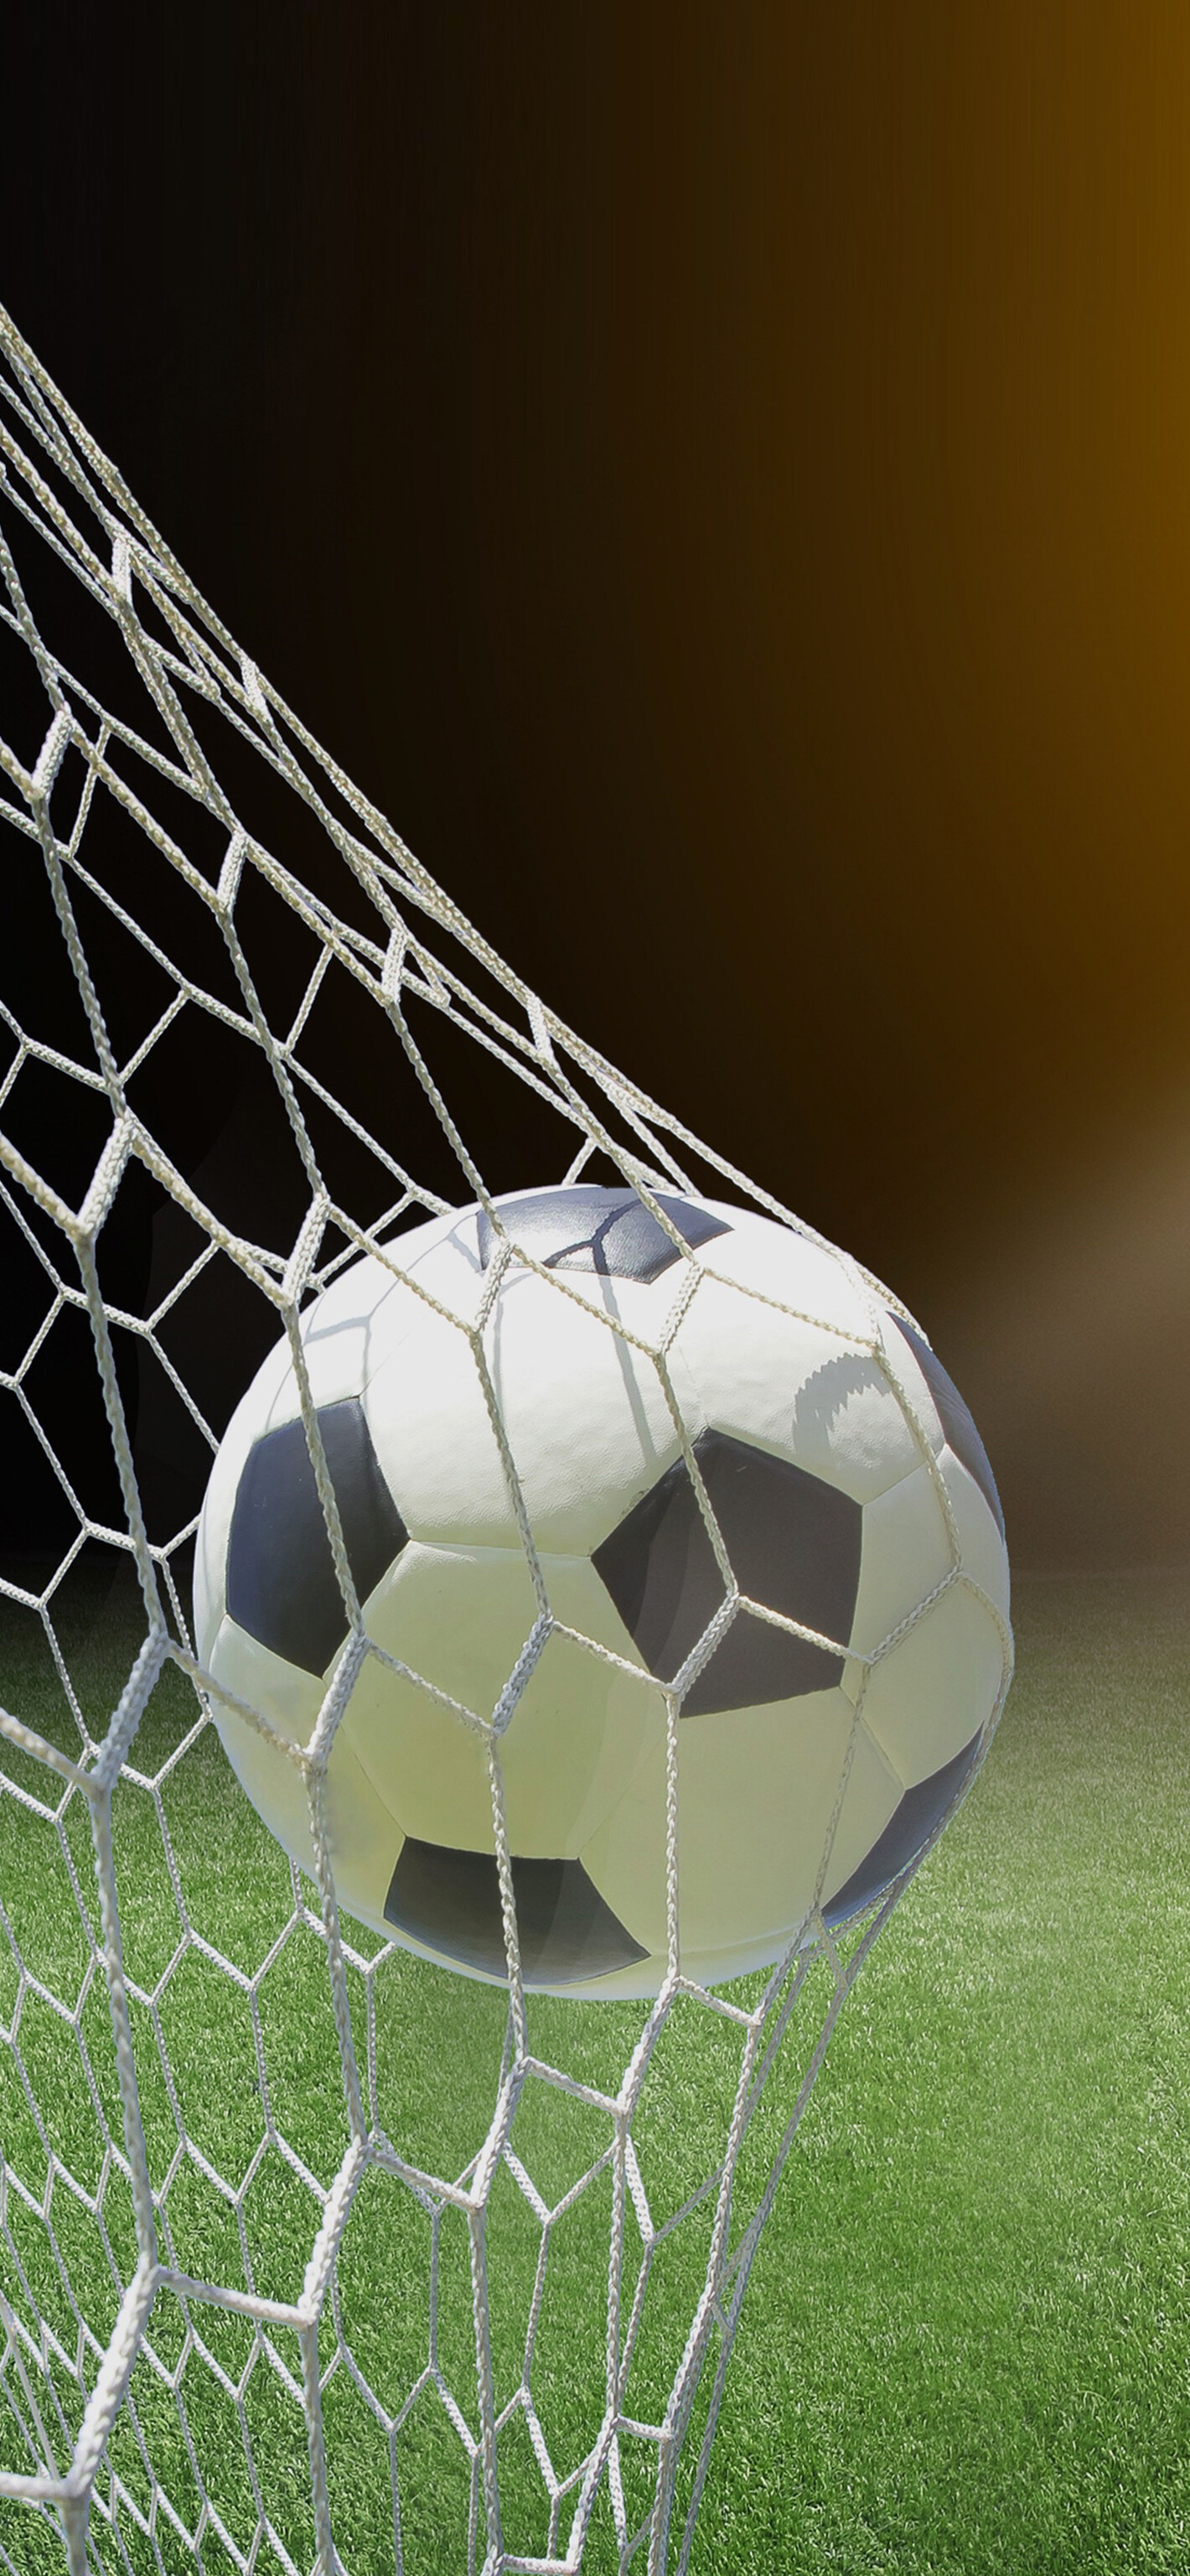 Goal (Sports): Telstar, A football made by Adidas, The 32-panel design of the ball, FIFA World Cup. 1420x3080 HD Background.